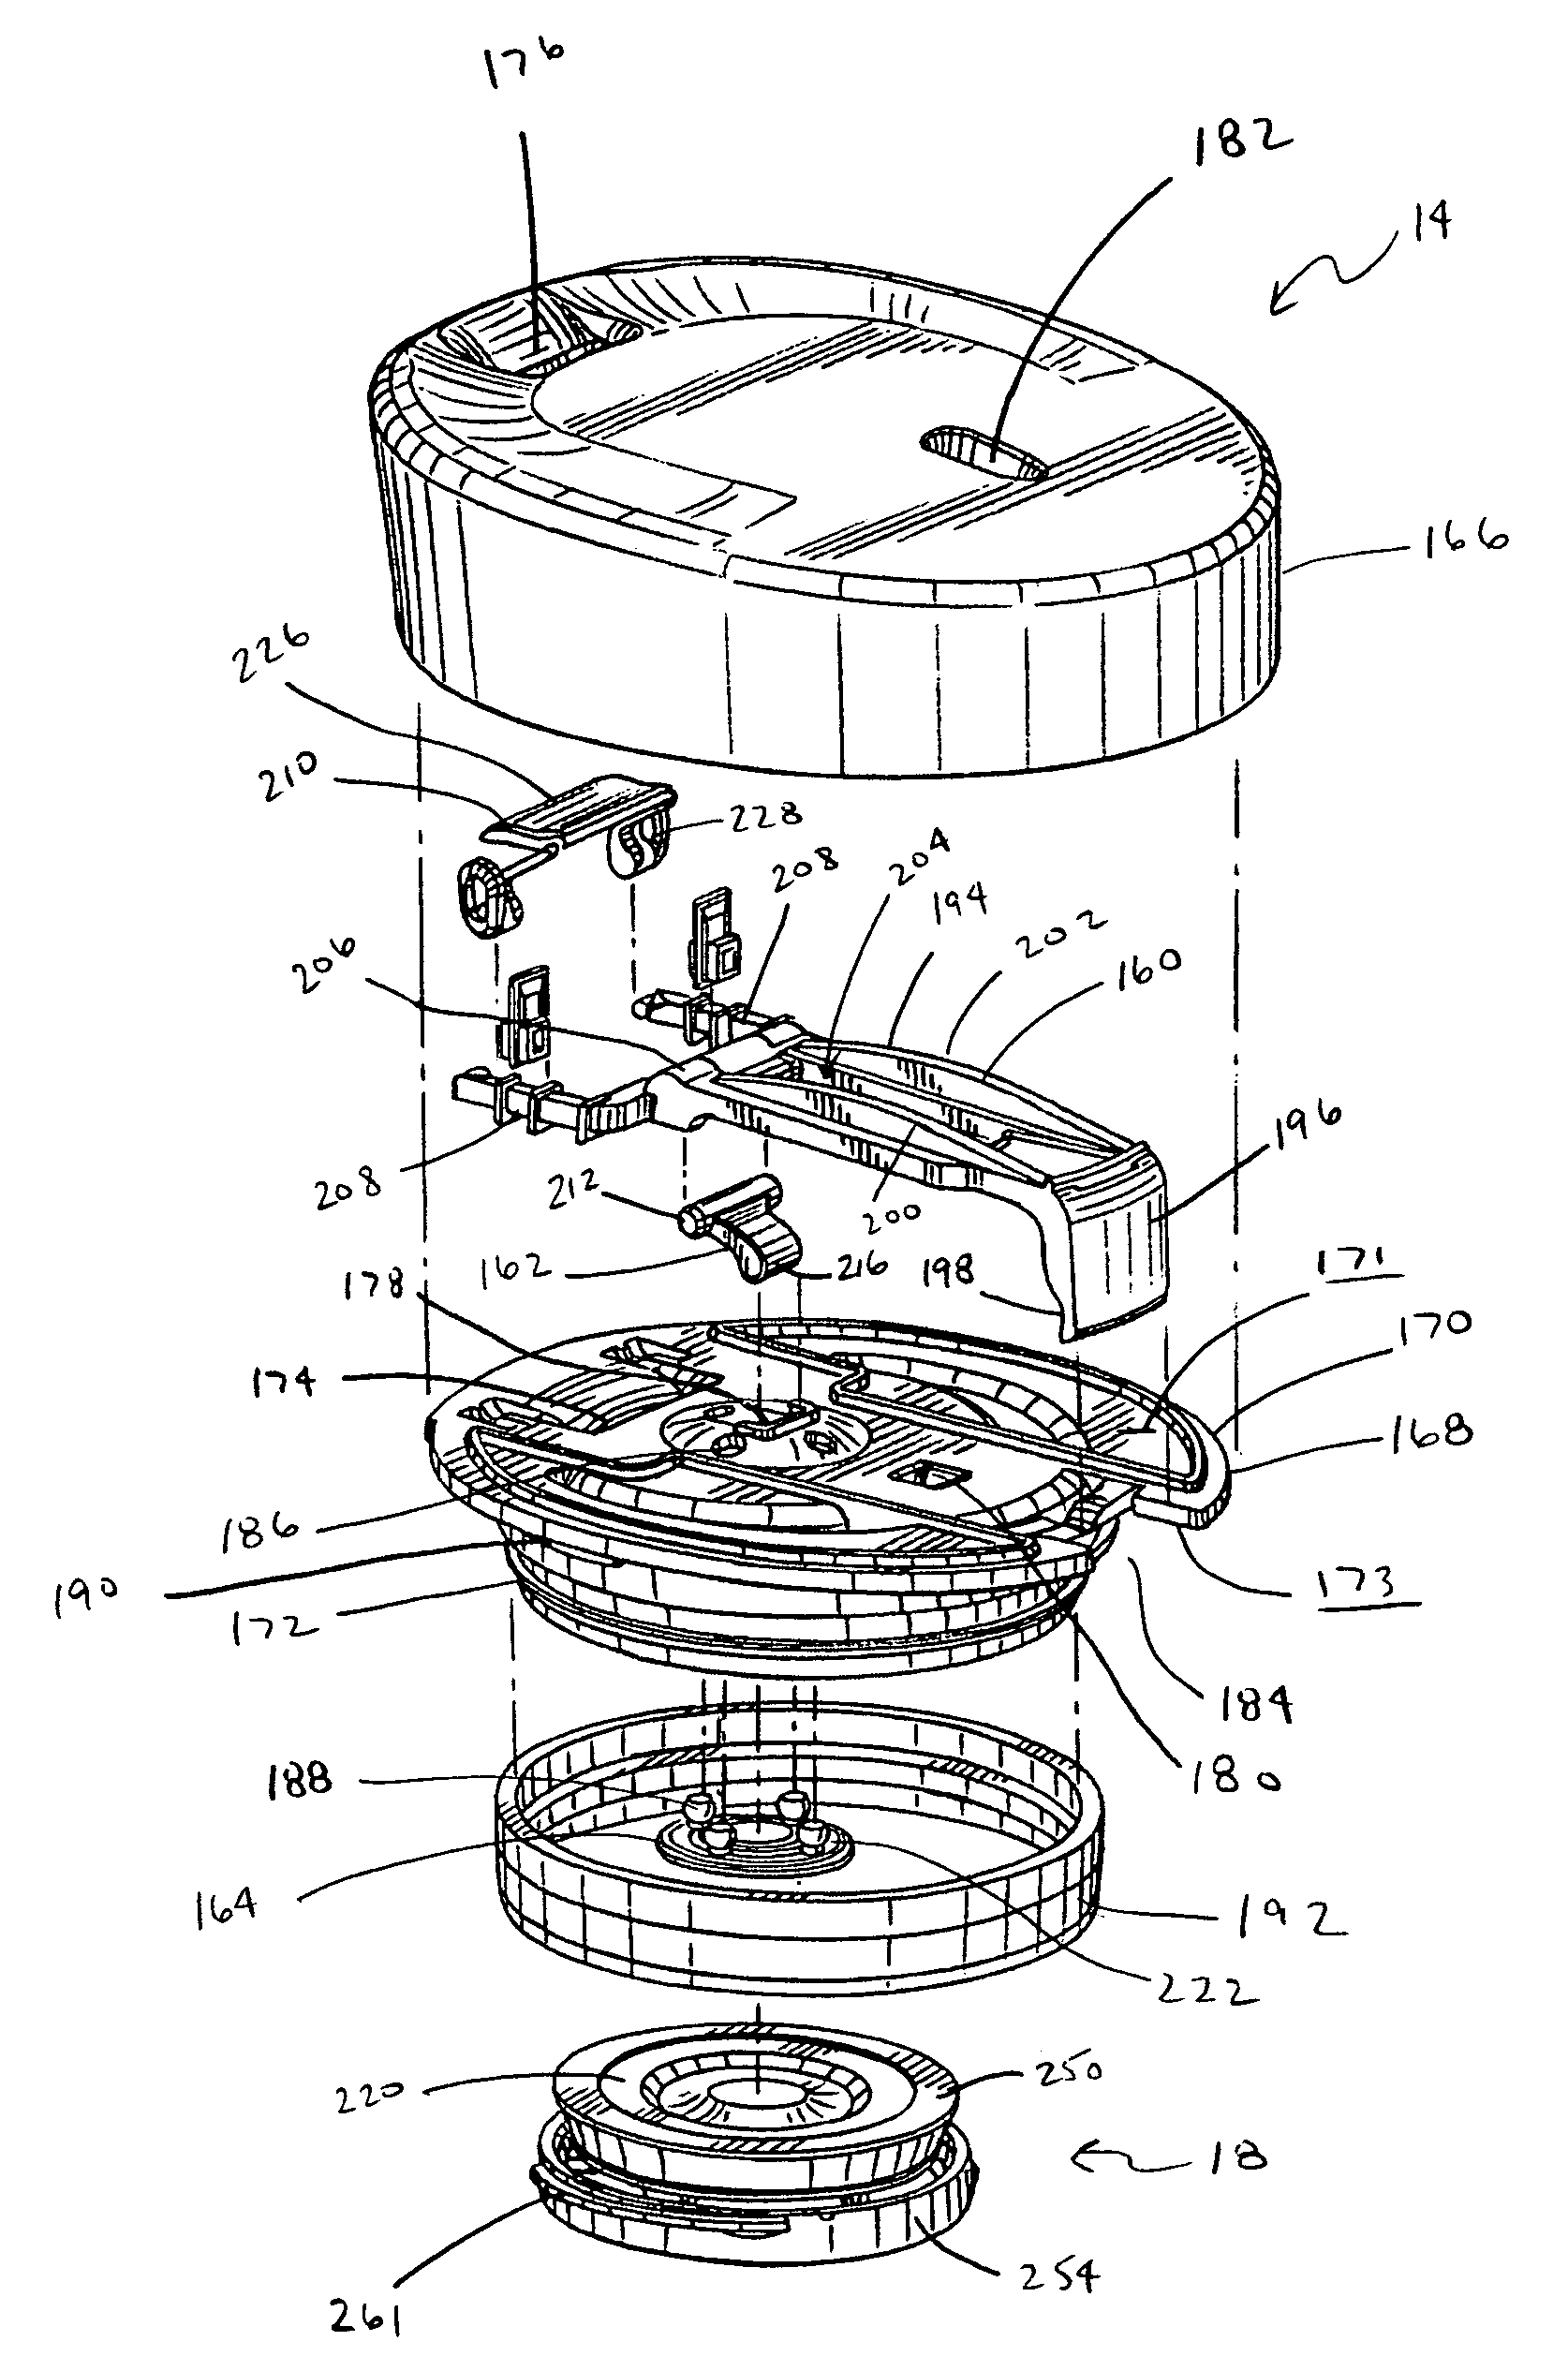 Travel container having drinking orifice and vent aperture seals